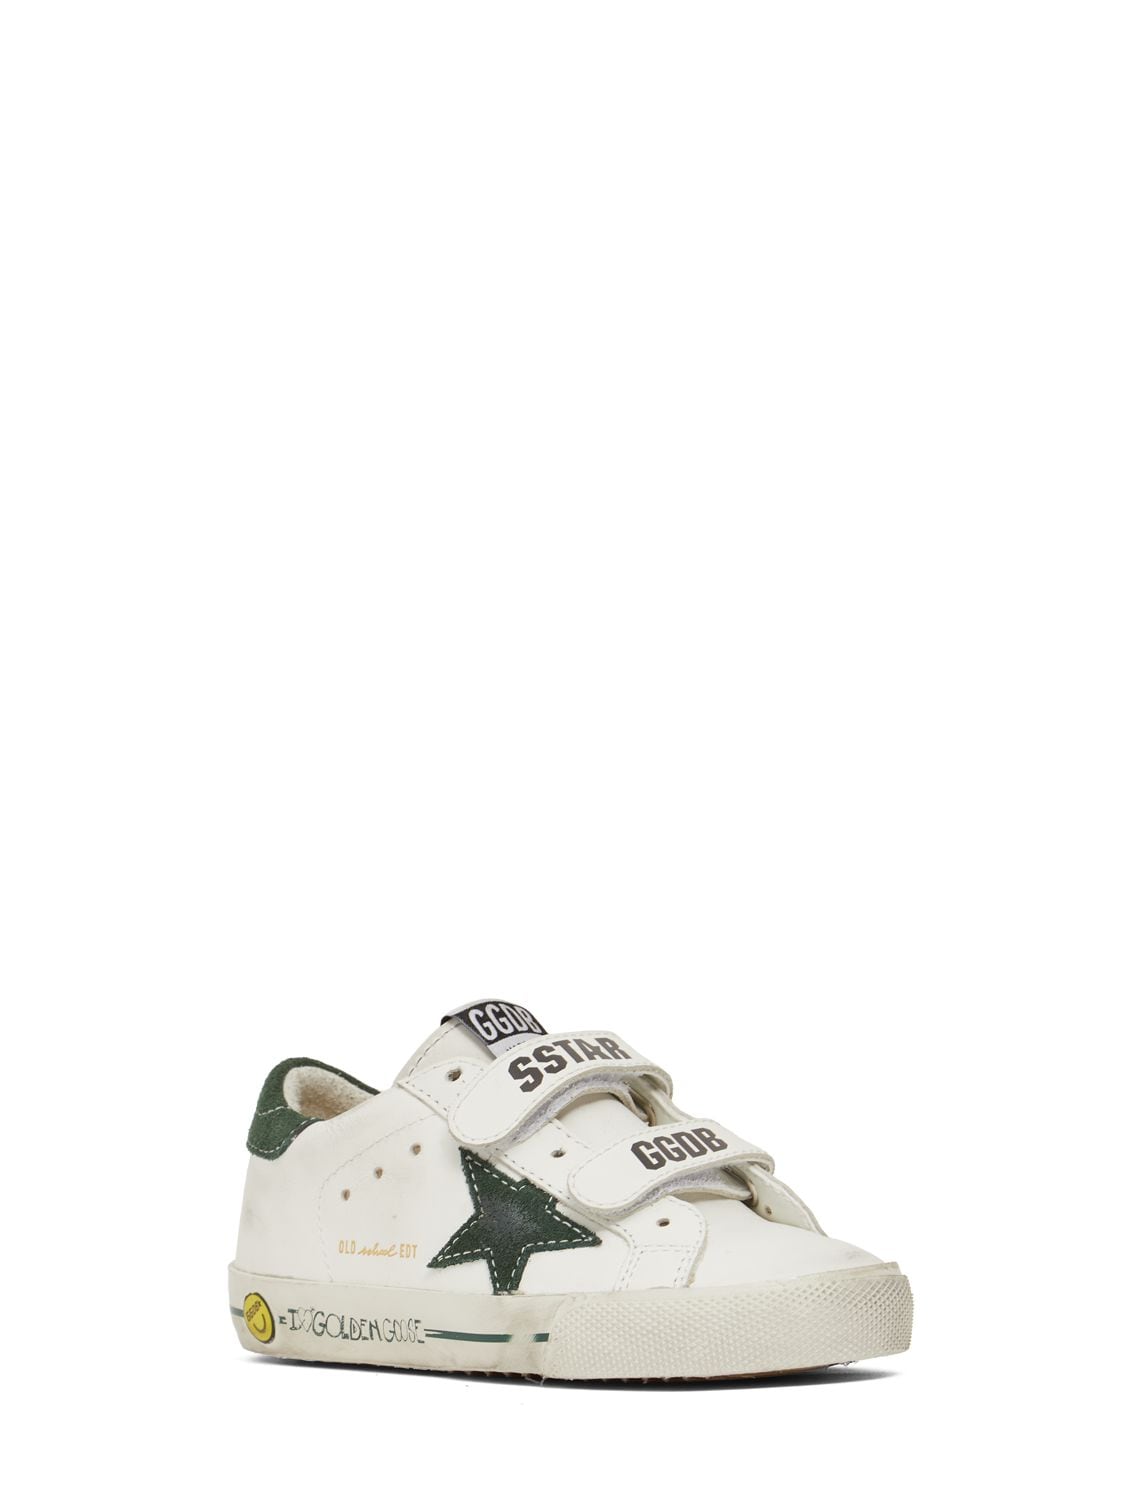 Shop Golden Goose Old School Leather Strap Sneakers In White,green